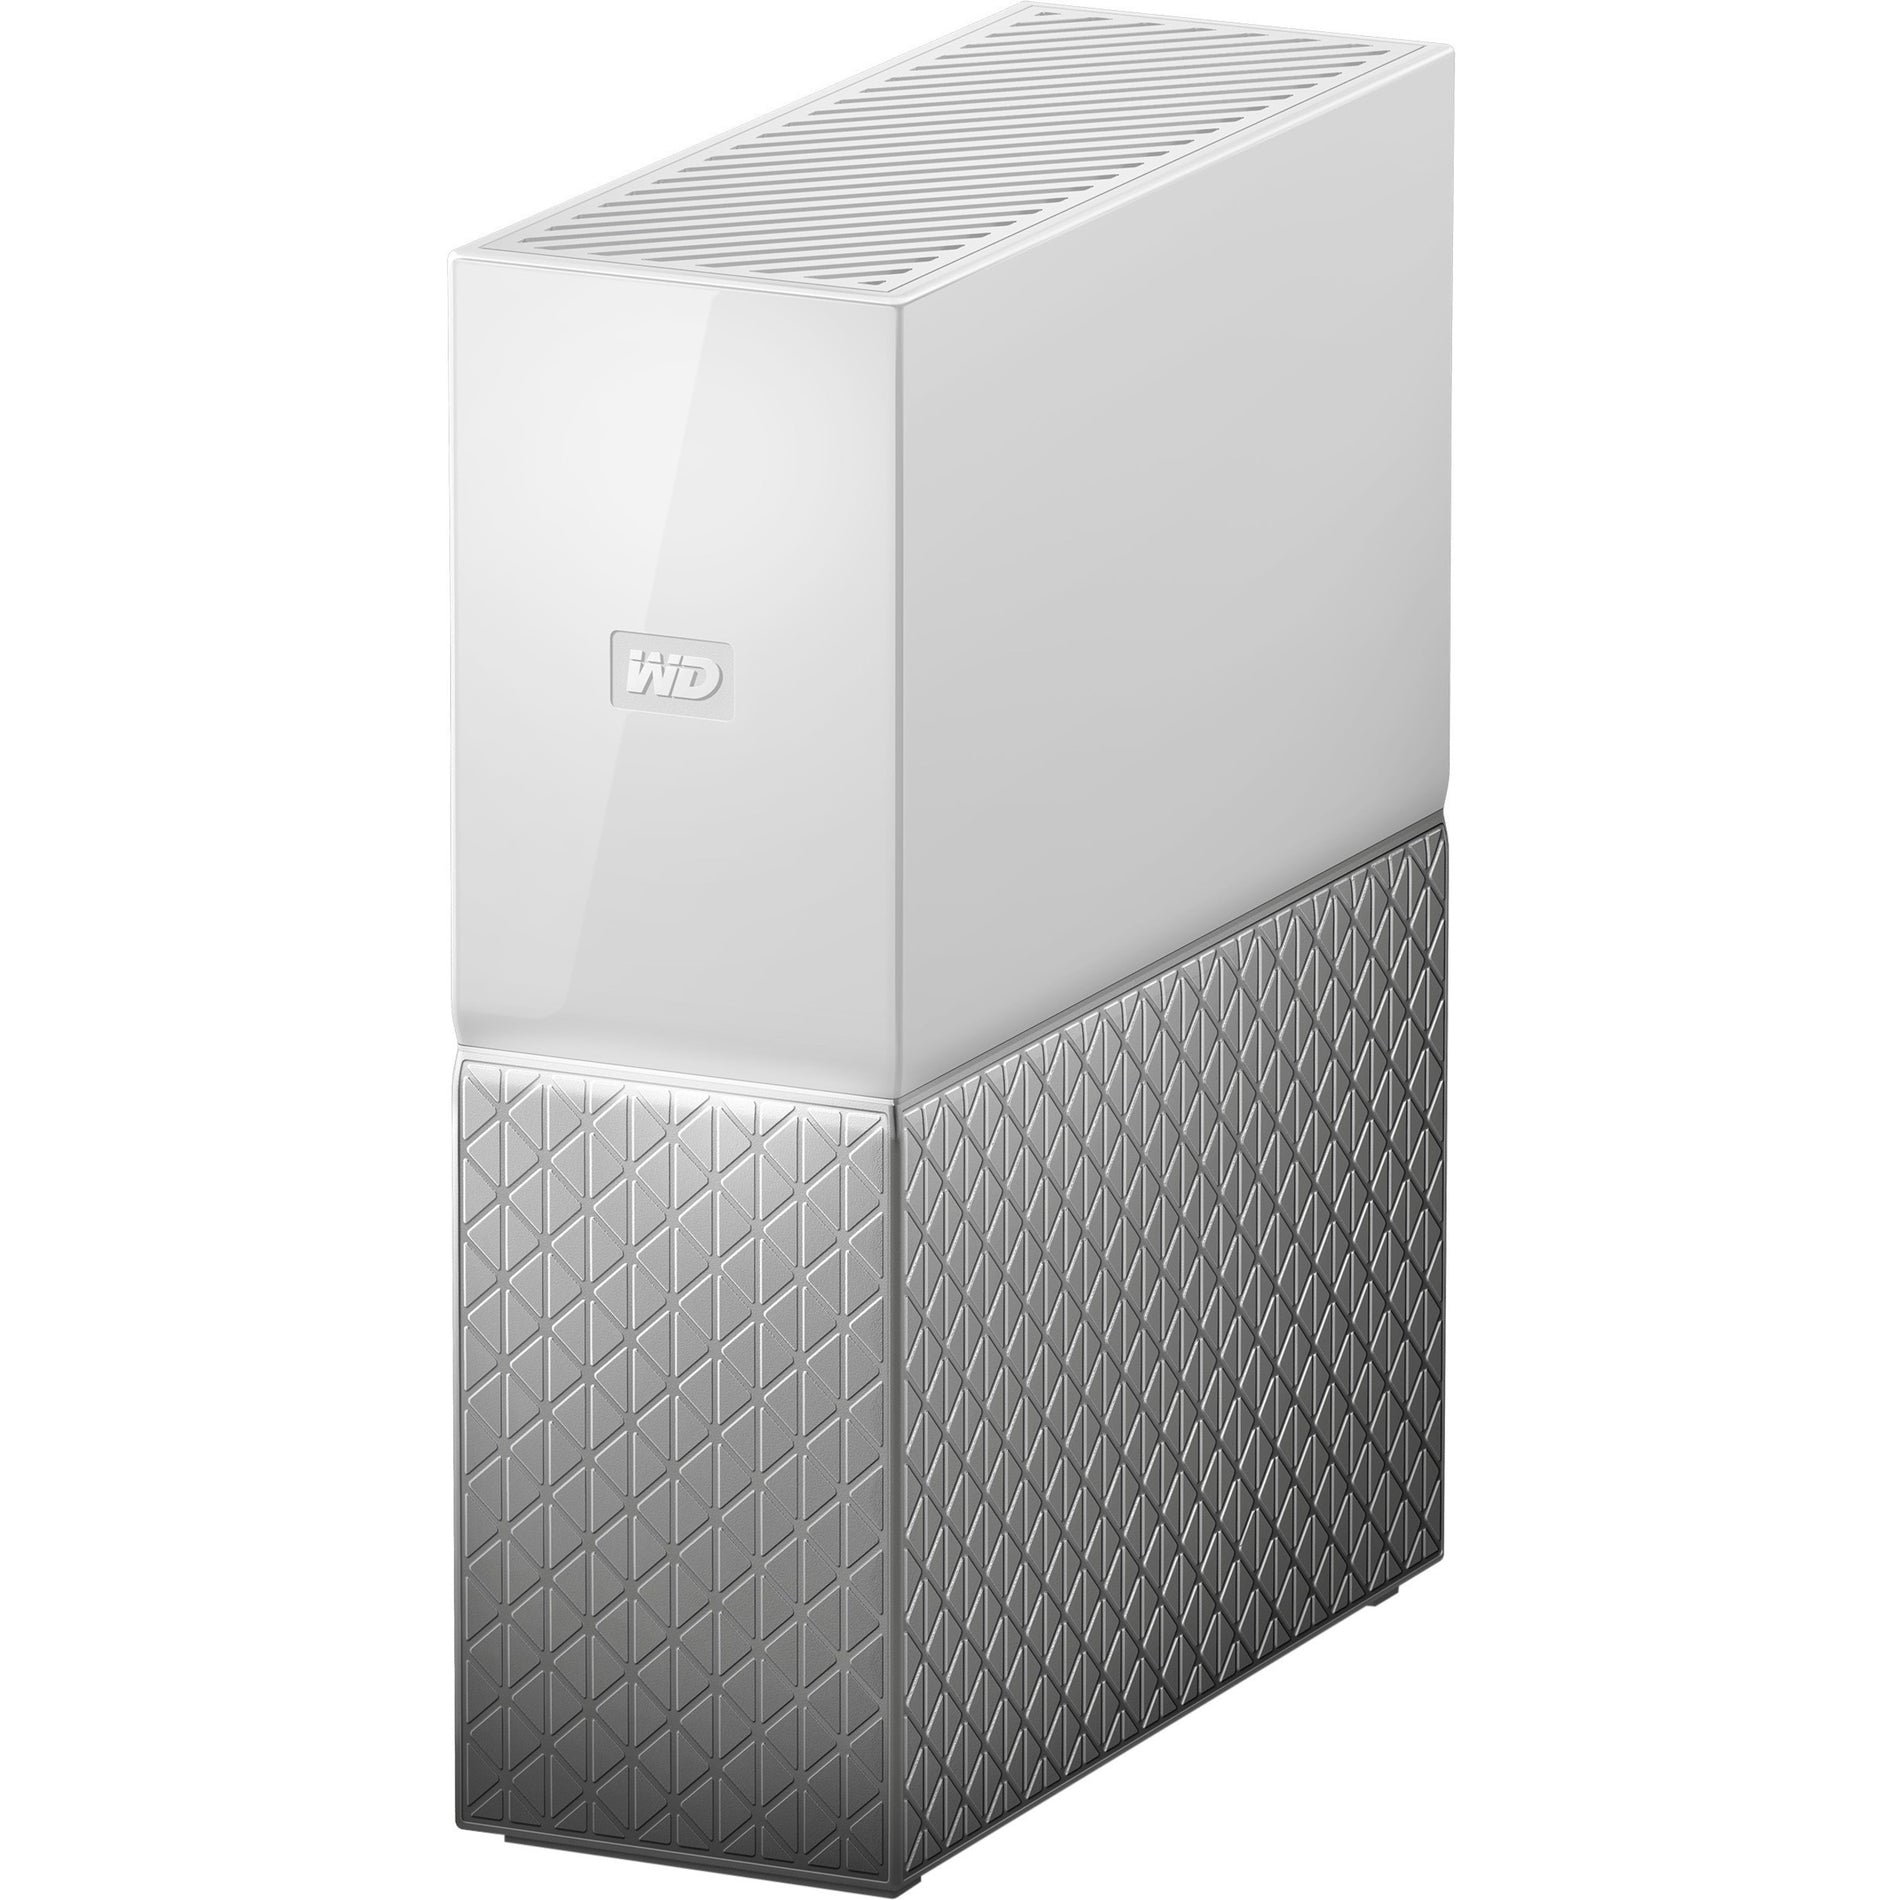 WD My Cloud Home Personal Cloud Storage (WDBVXC0040HWT-NESN) Top image